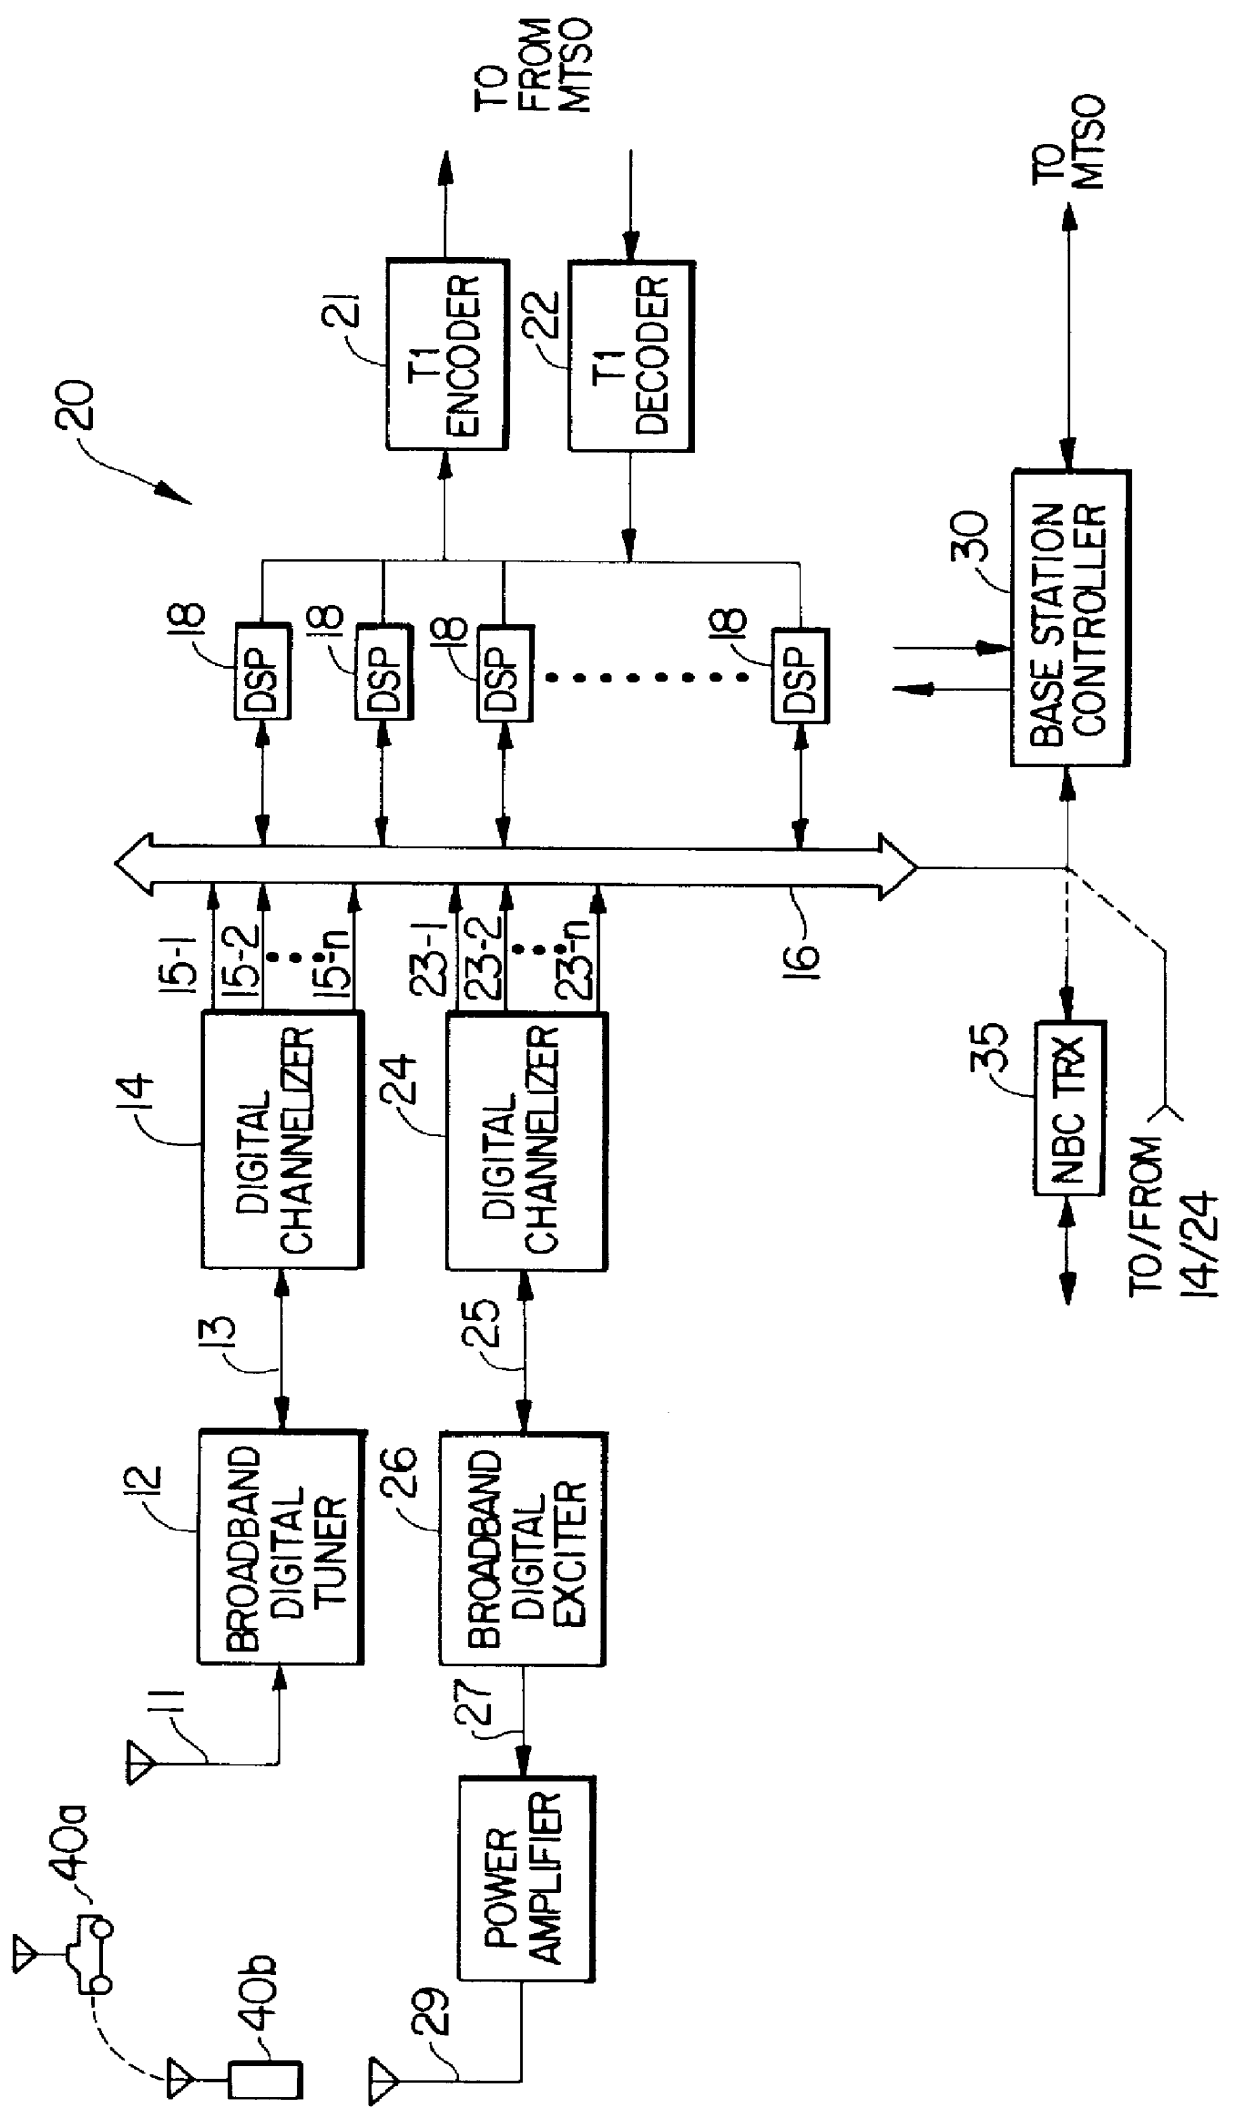 Multichannel broadband transceiver system making use of a distributed control architecture for digital signal processor array